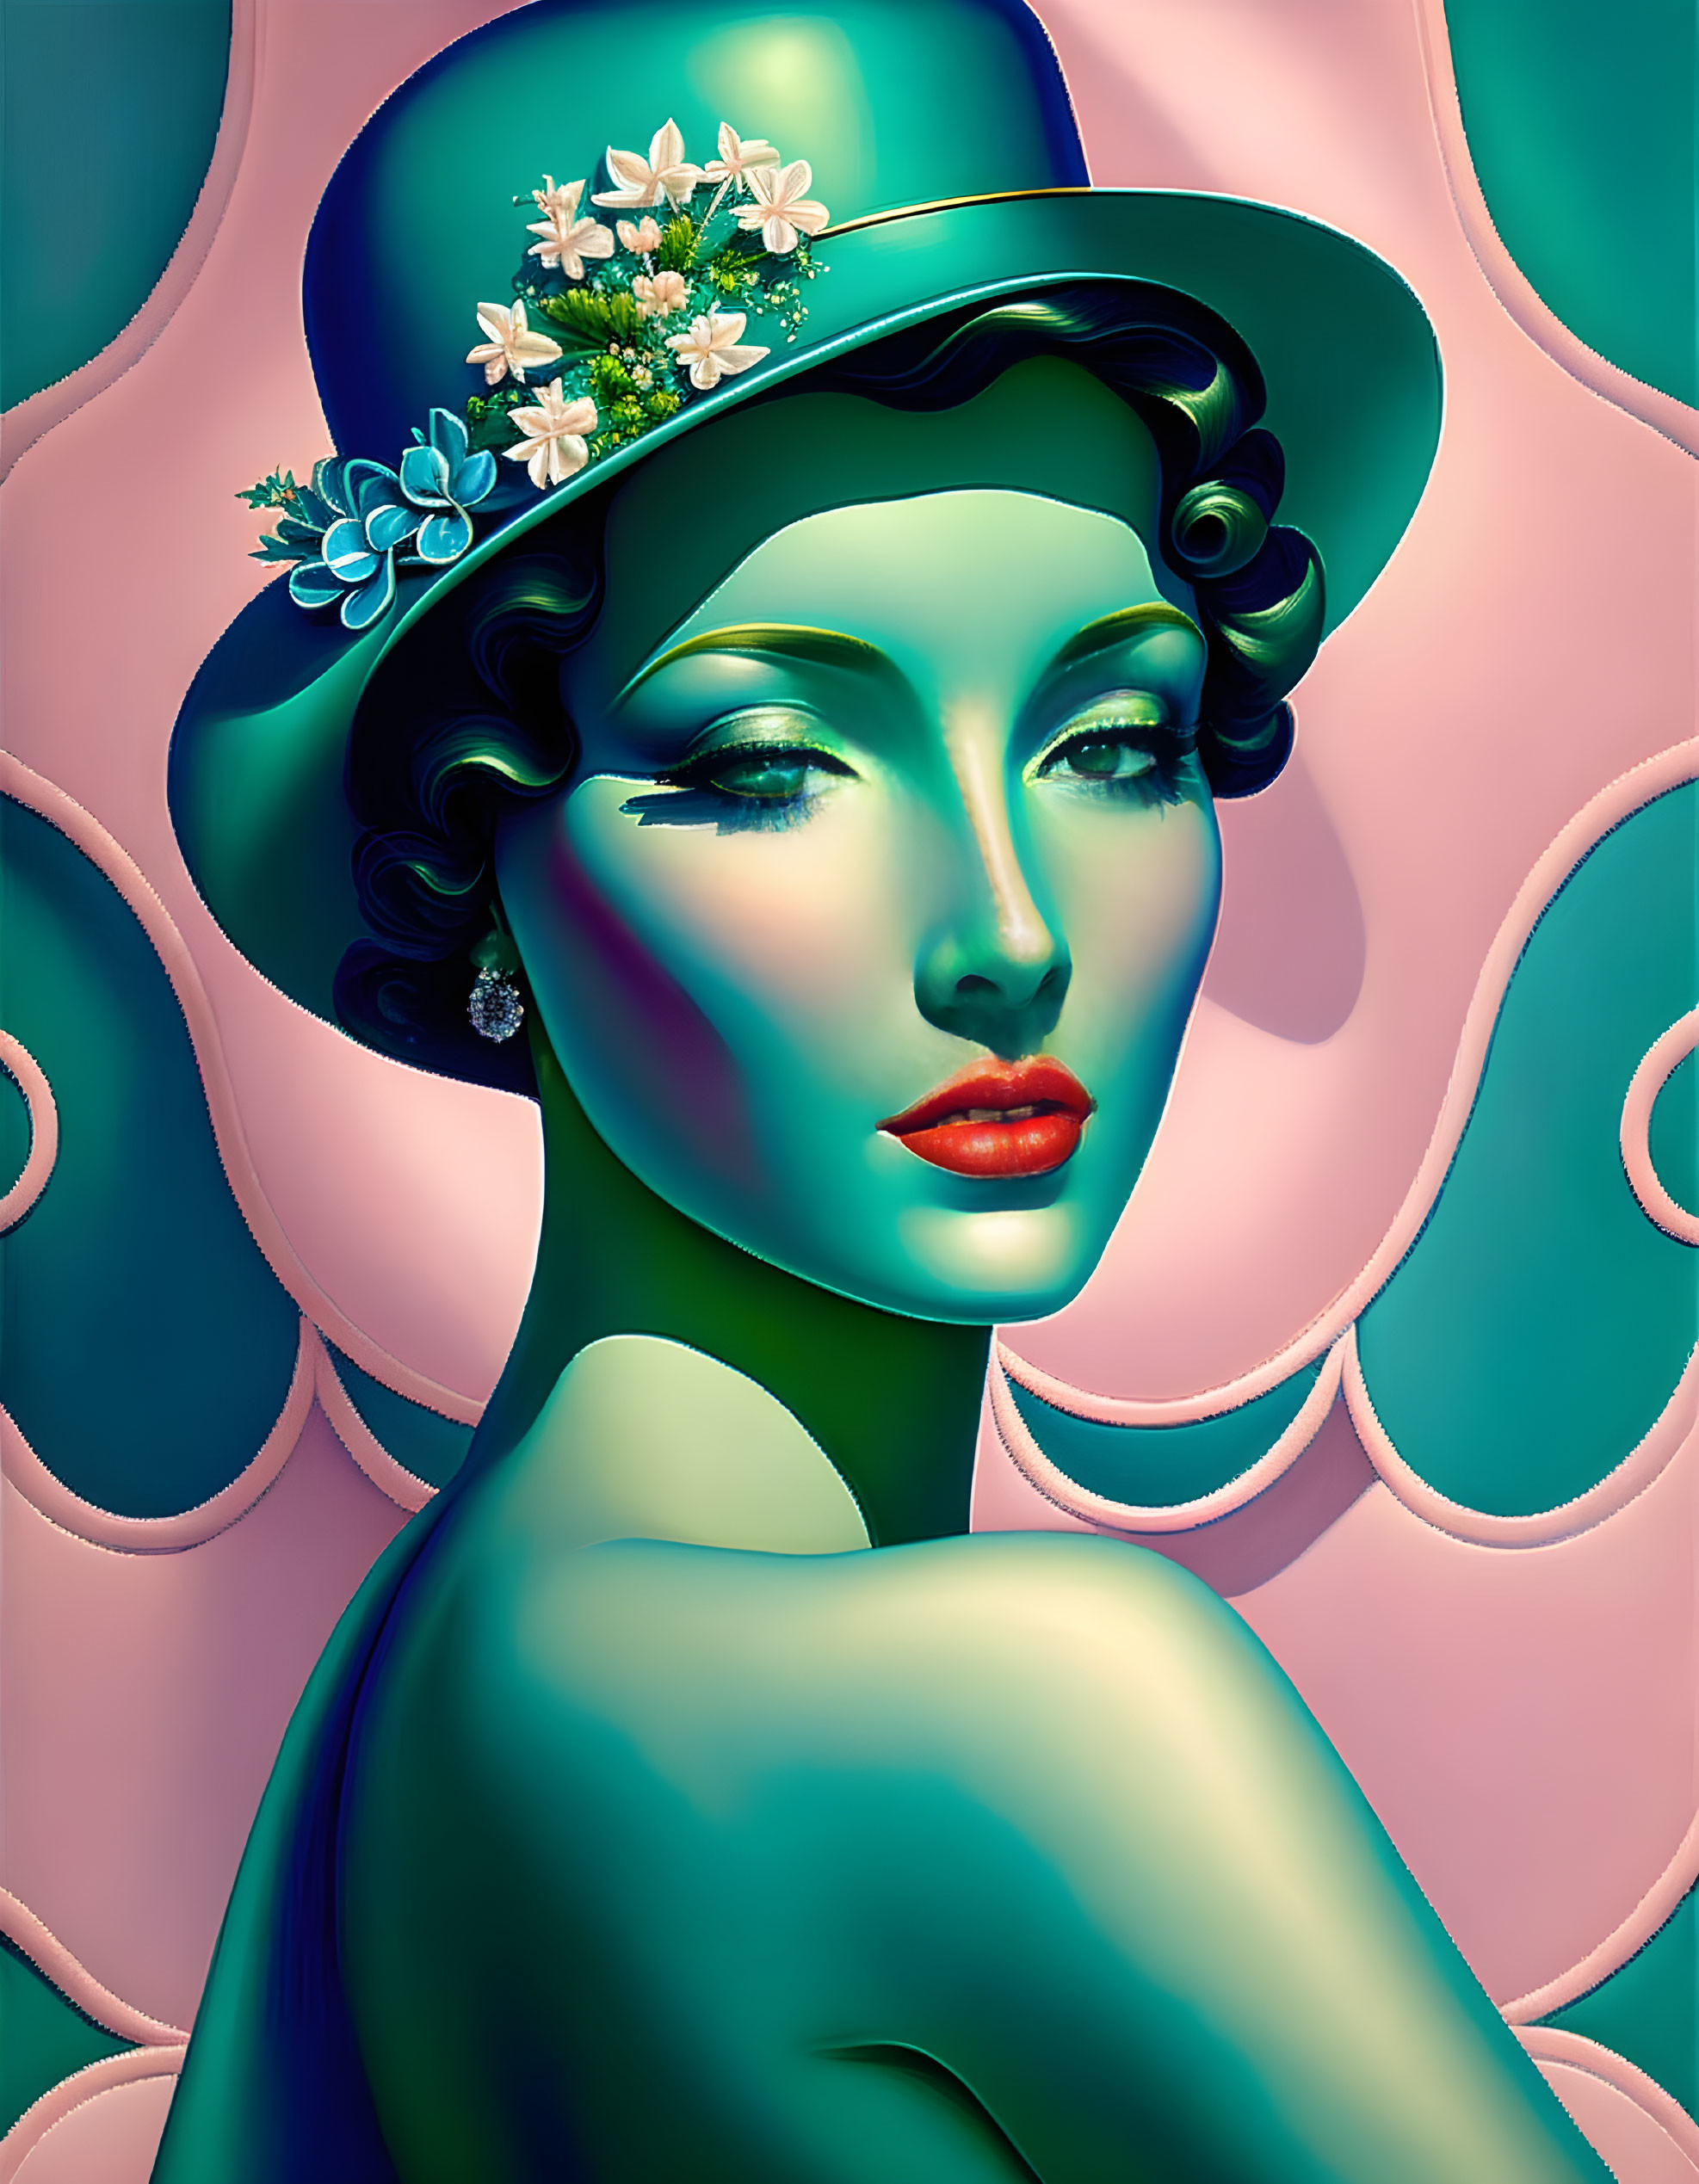 Stylized portrait of woman with green skin and floral hat against pink background